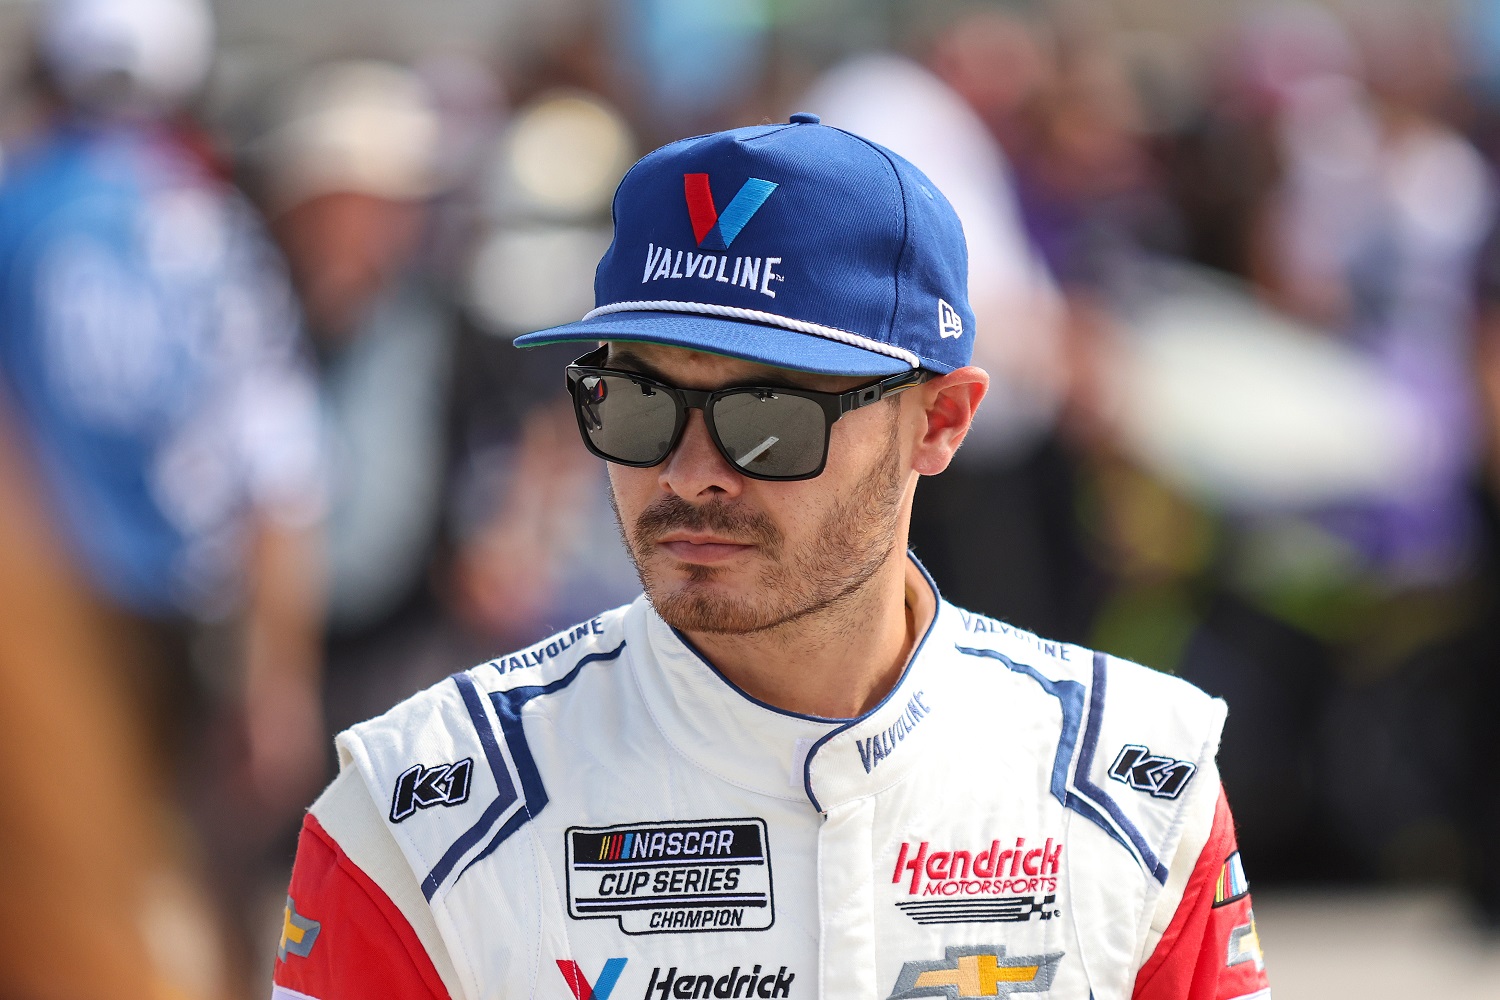 Kyle Larson looks on during qualifying for the NASCAR Cup Series Dixie Vodka 400 at Homestead-Miami Speedway on Oct. 22, 2022.